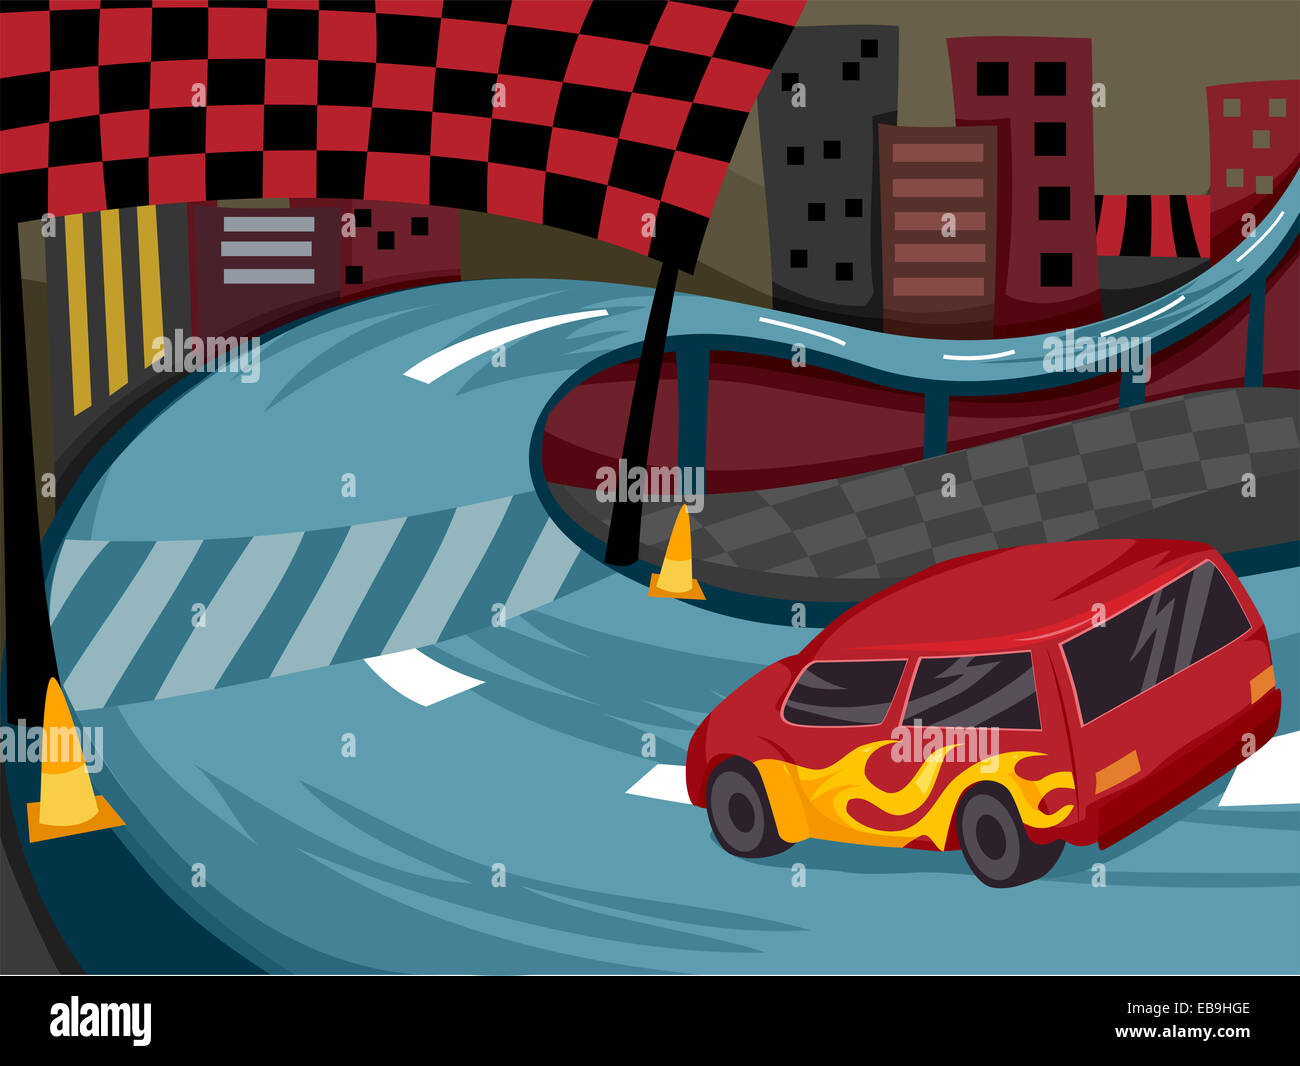 Illustration Featuring a Race Car Racing Down a Race Track Stock Photo